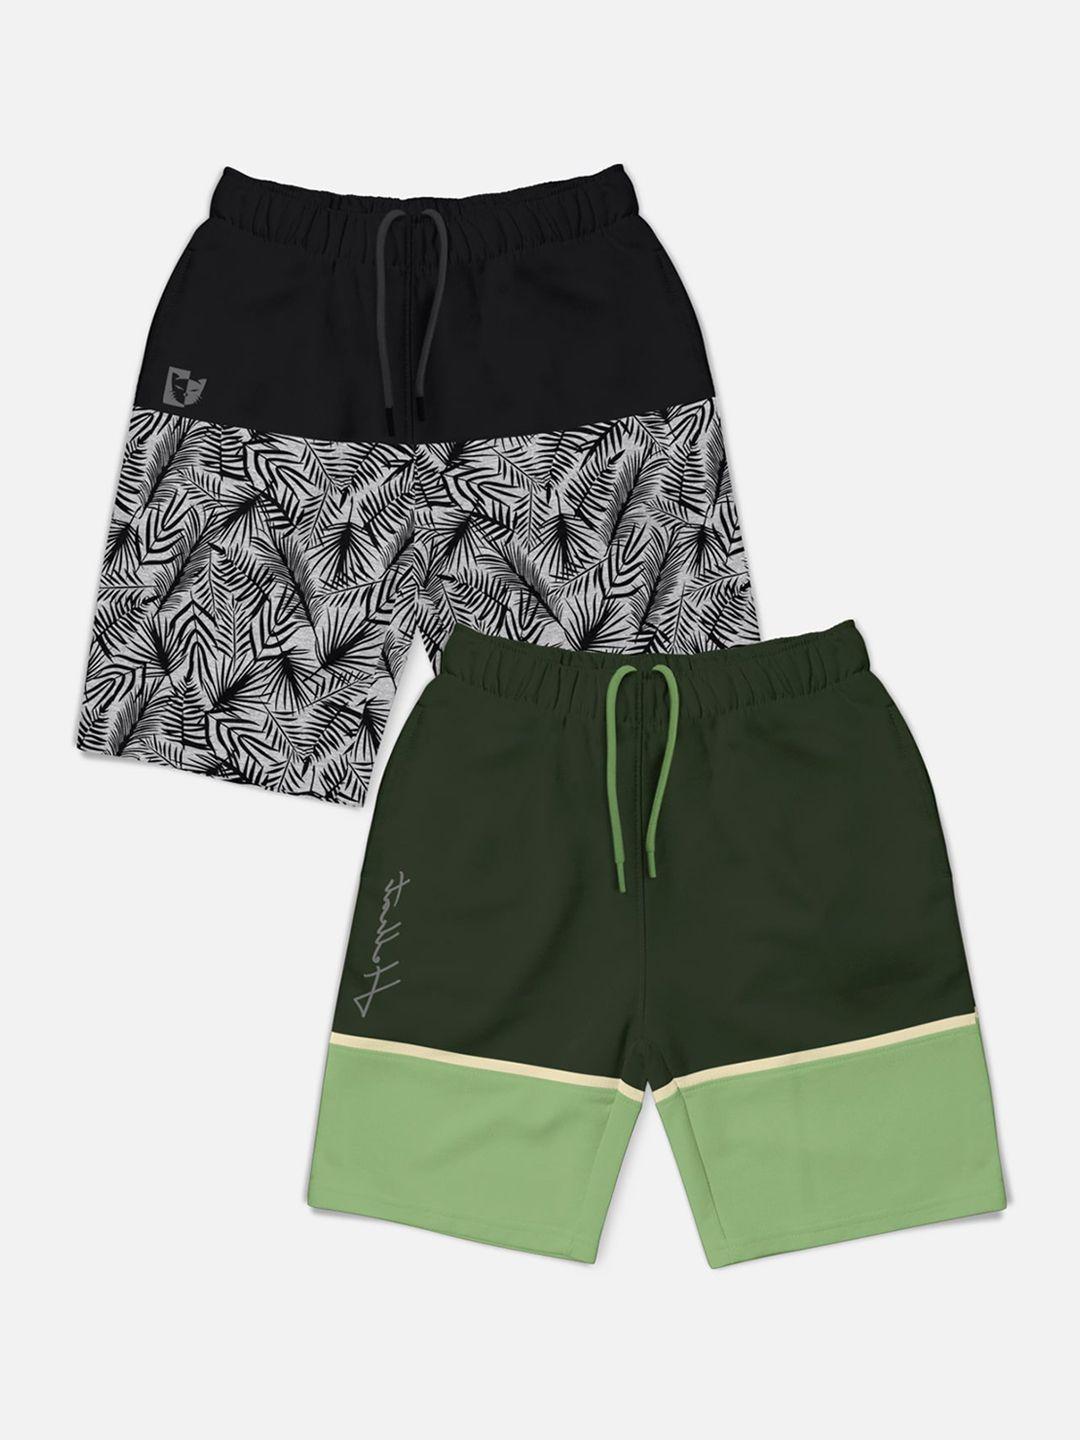 hellcat boys pack of 2 printed mid-rise cotton shorts